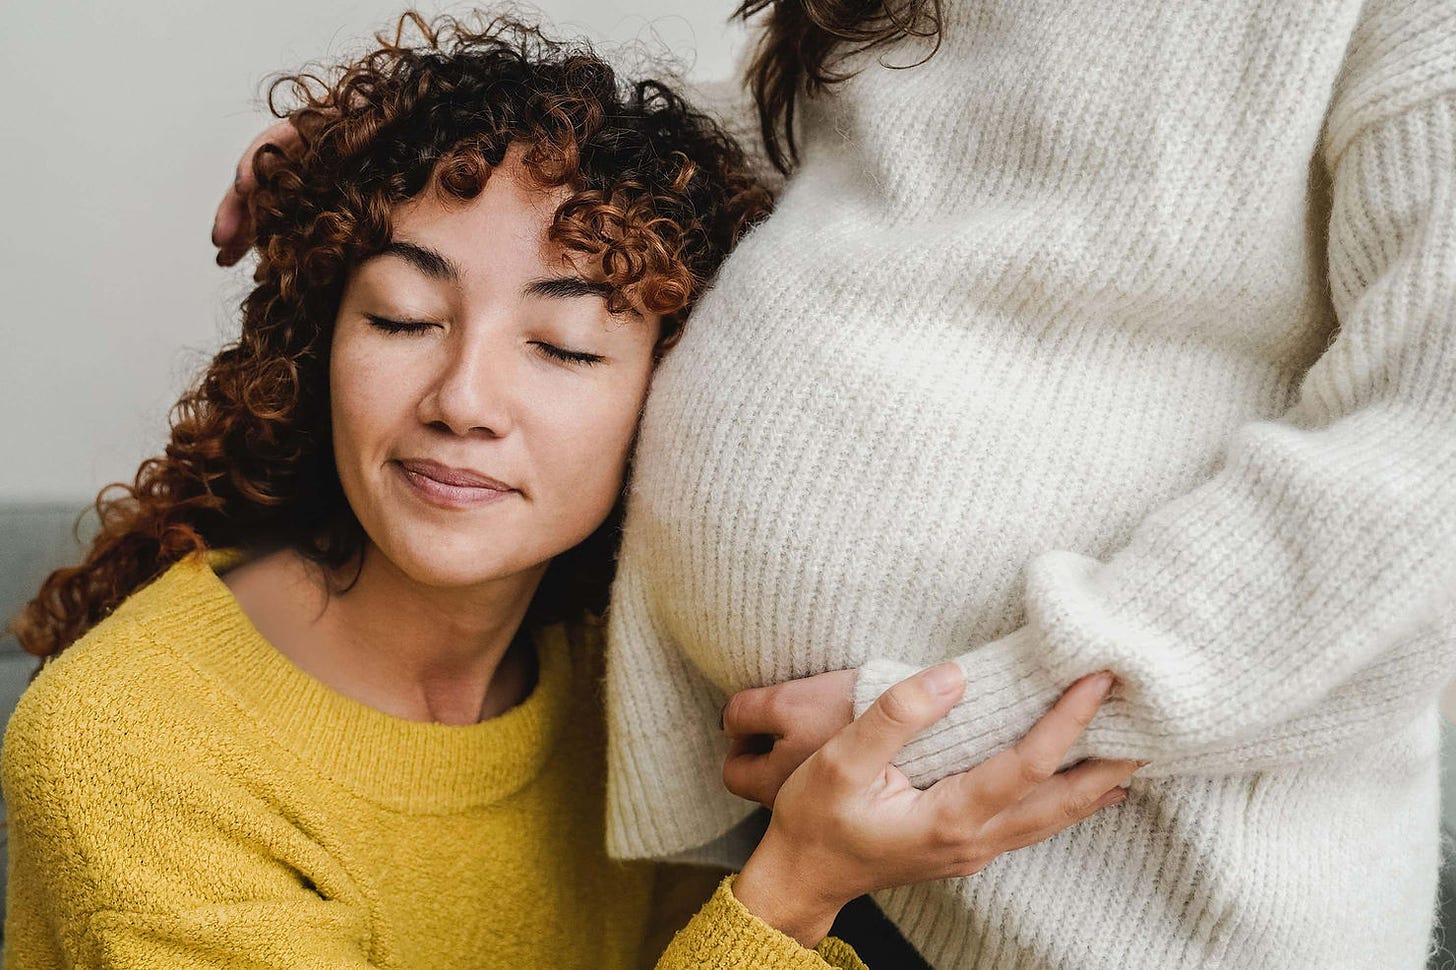 Gay female couple having tender moment listening her pregnant wife baby belly